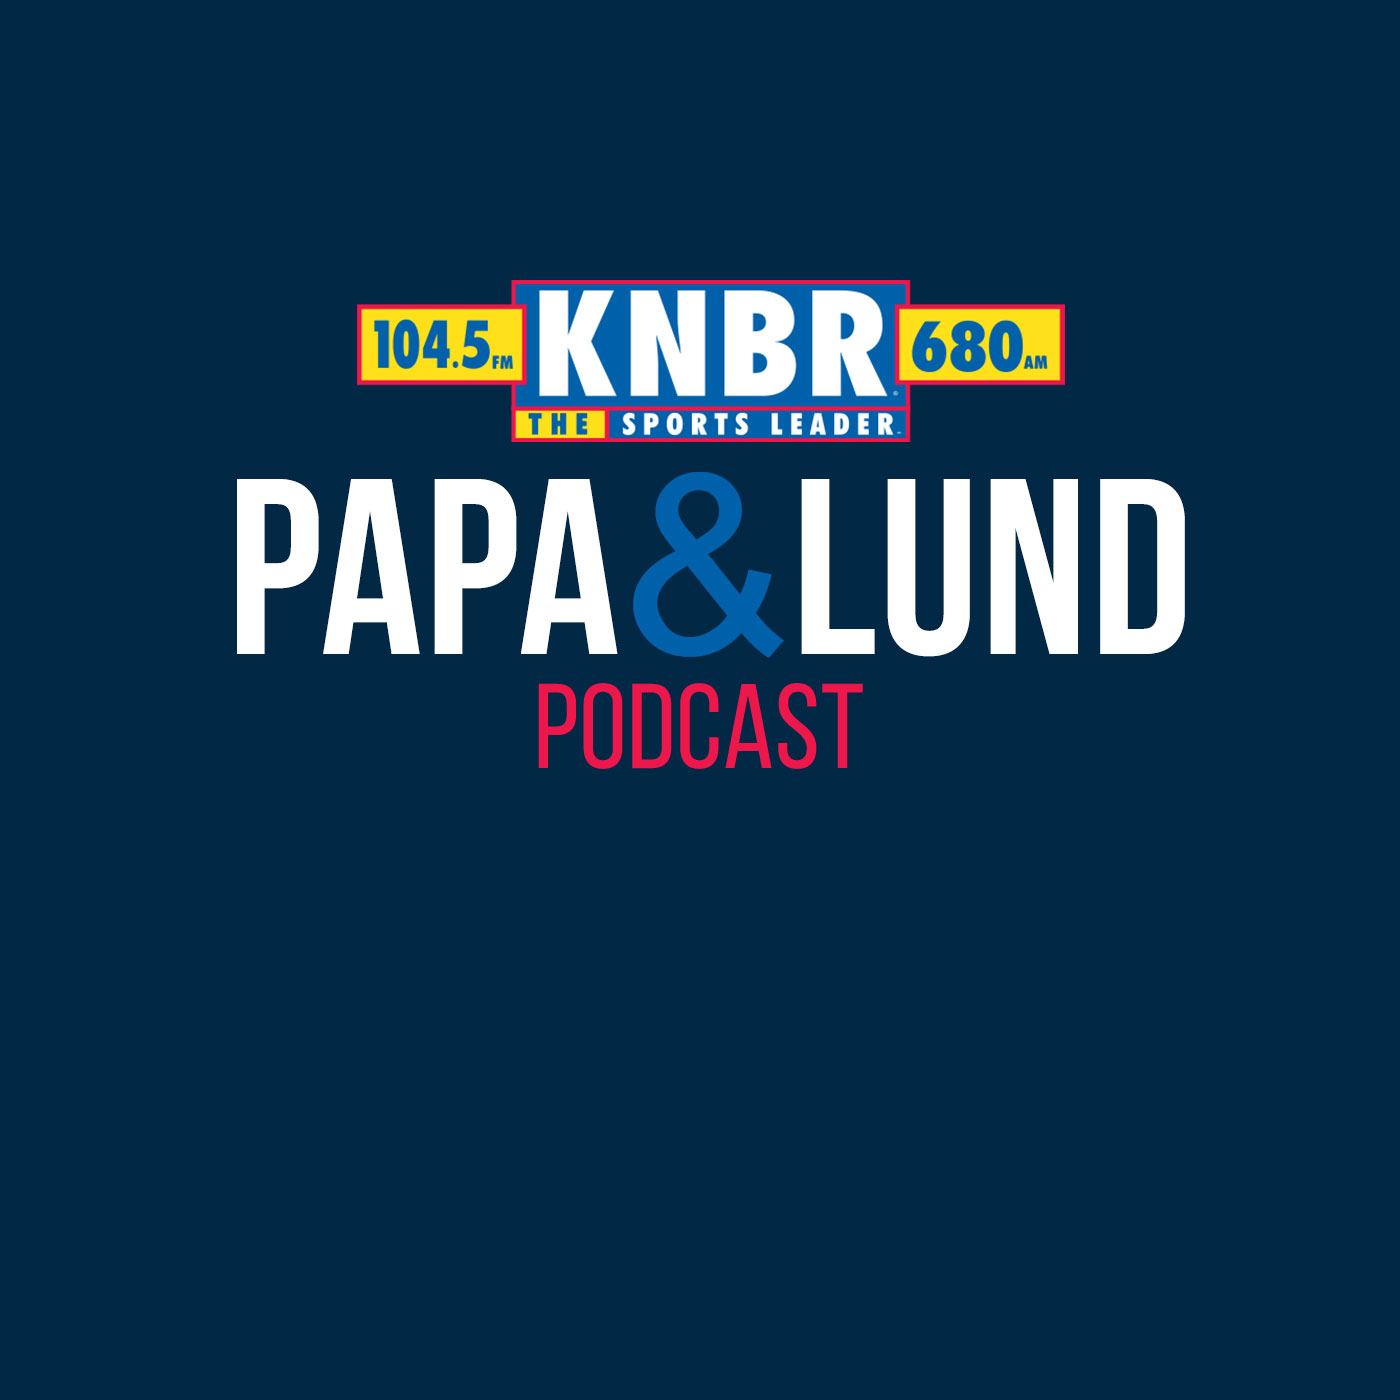 6-21 Monte Poole joins Papa & Lund to discuss the effects that Bob Myers leaving will have on the current roster and detail the biggest take aways from Mike Dunleavy's introductory press conference